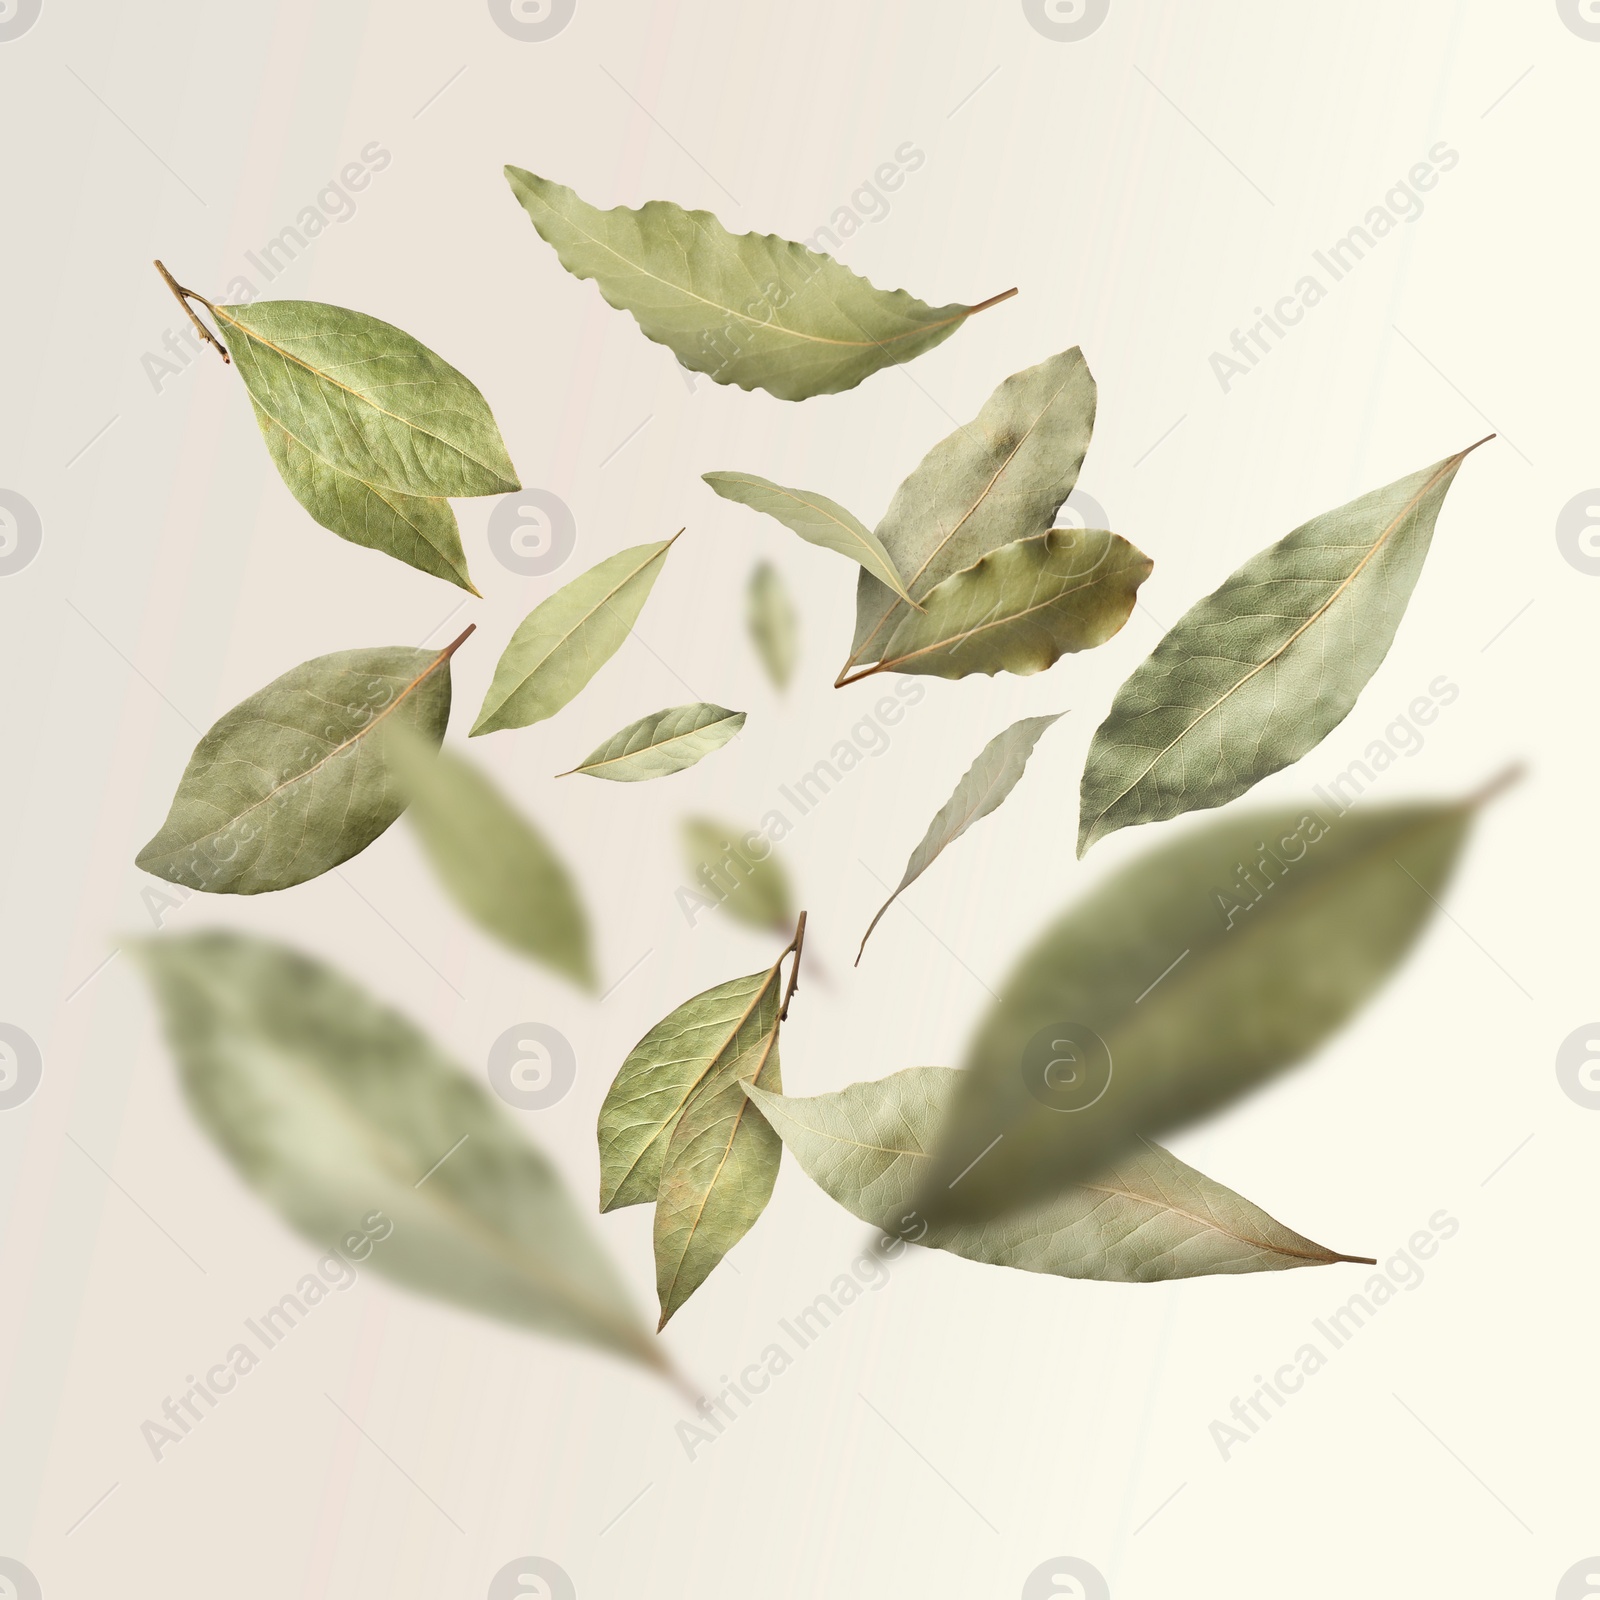 Image of Dry bay leaves falling on light background